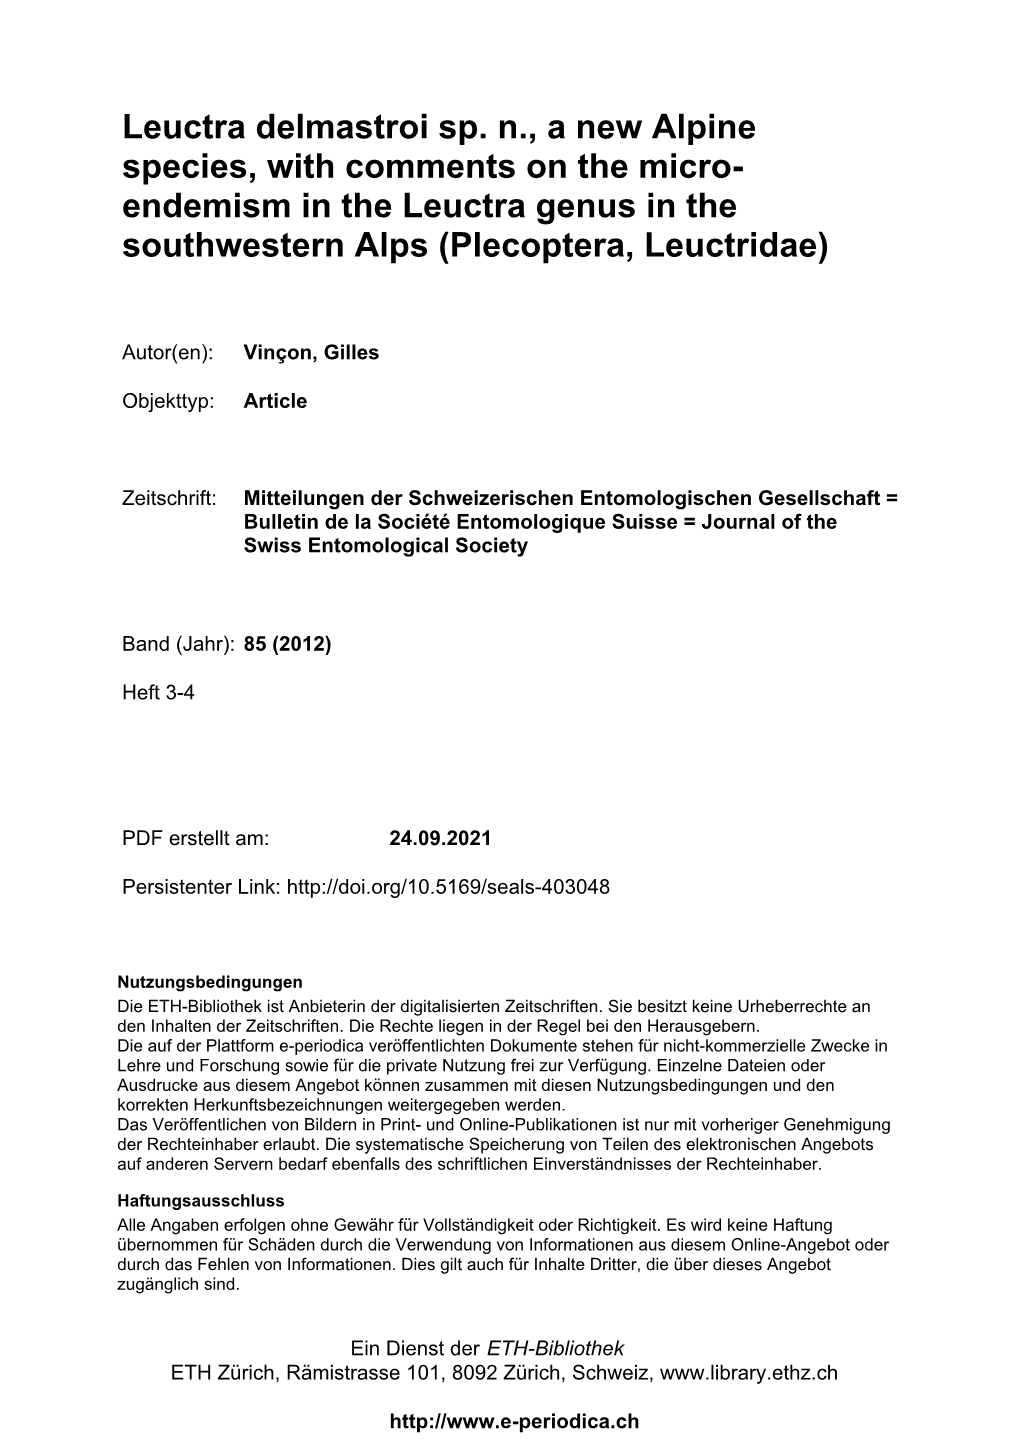 Leuctra Delmastroi Sp. N., a New Alpine Species, with Comments on the Micro- Endemism in the Leuctra Genus in the Southwestern Alps (Plecoptera, Leuctridae)